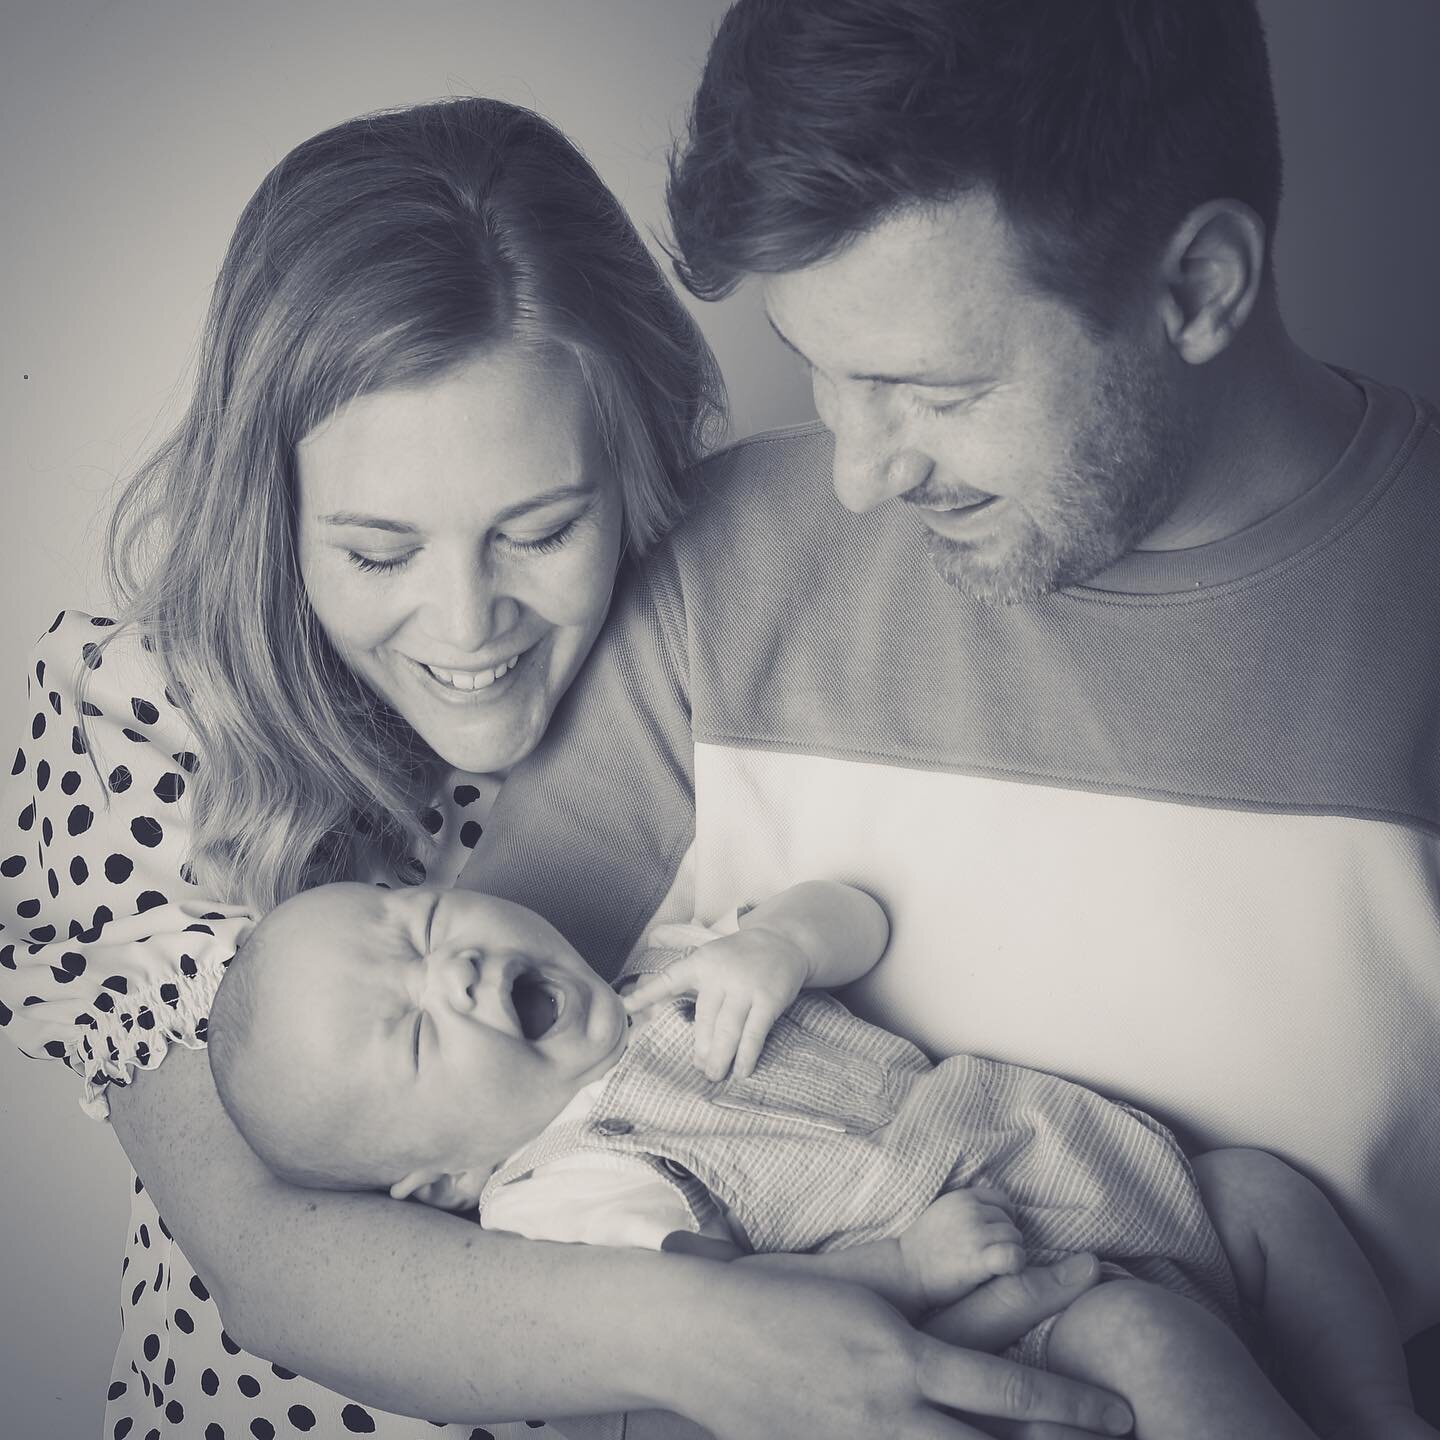 After photographing their beautiful wedding back in 2019 it was lovely to see these guys in the studio with their cheeky new arrival! 🥰
.
.
.
.
.
#babyphotographer #bedfordshirebusiness #bedfordphotographer #bedfordphotography #familyphotography #be